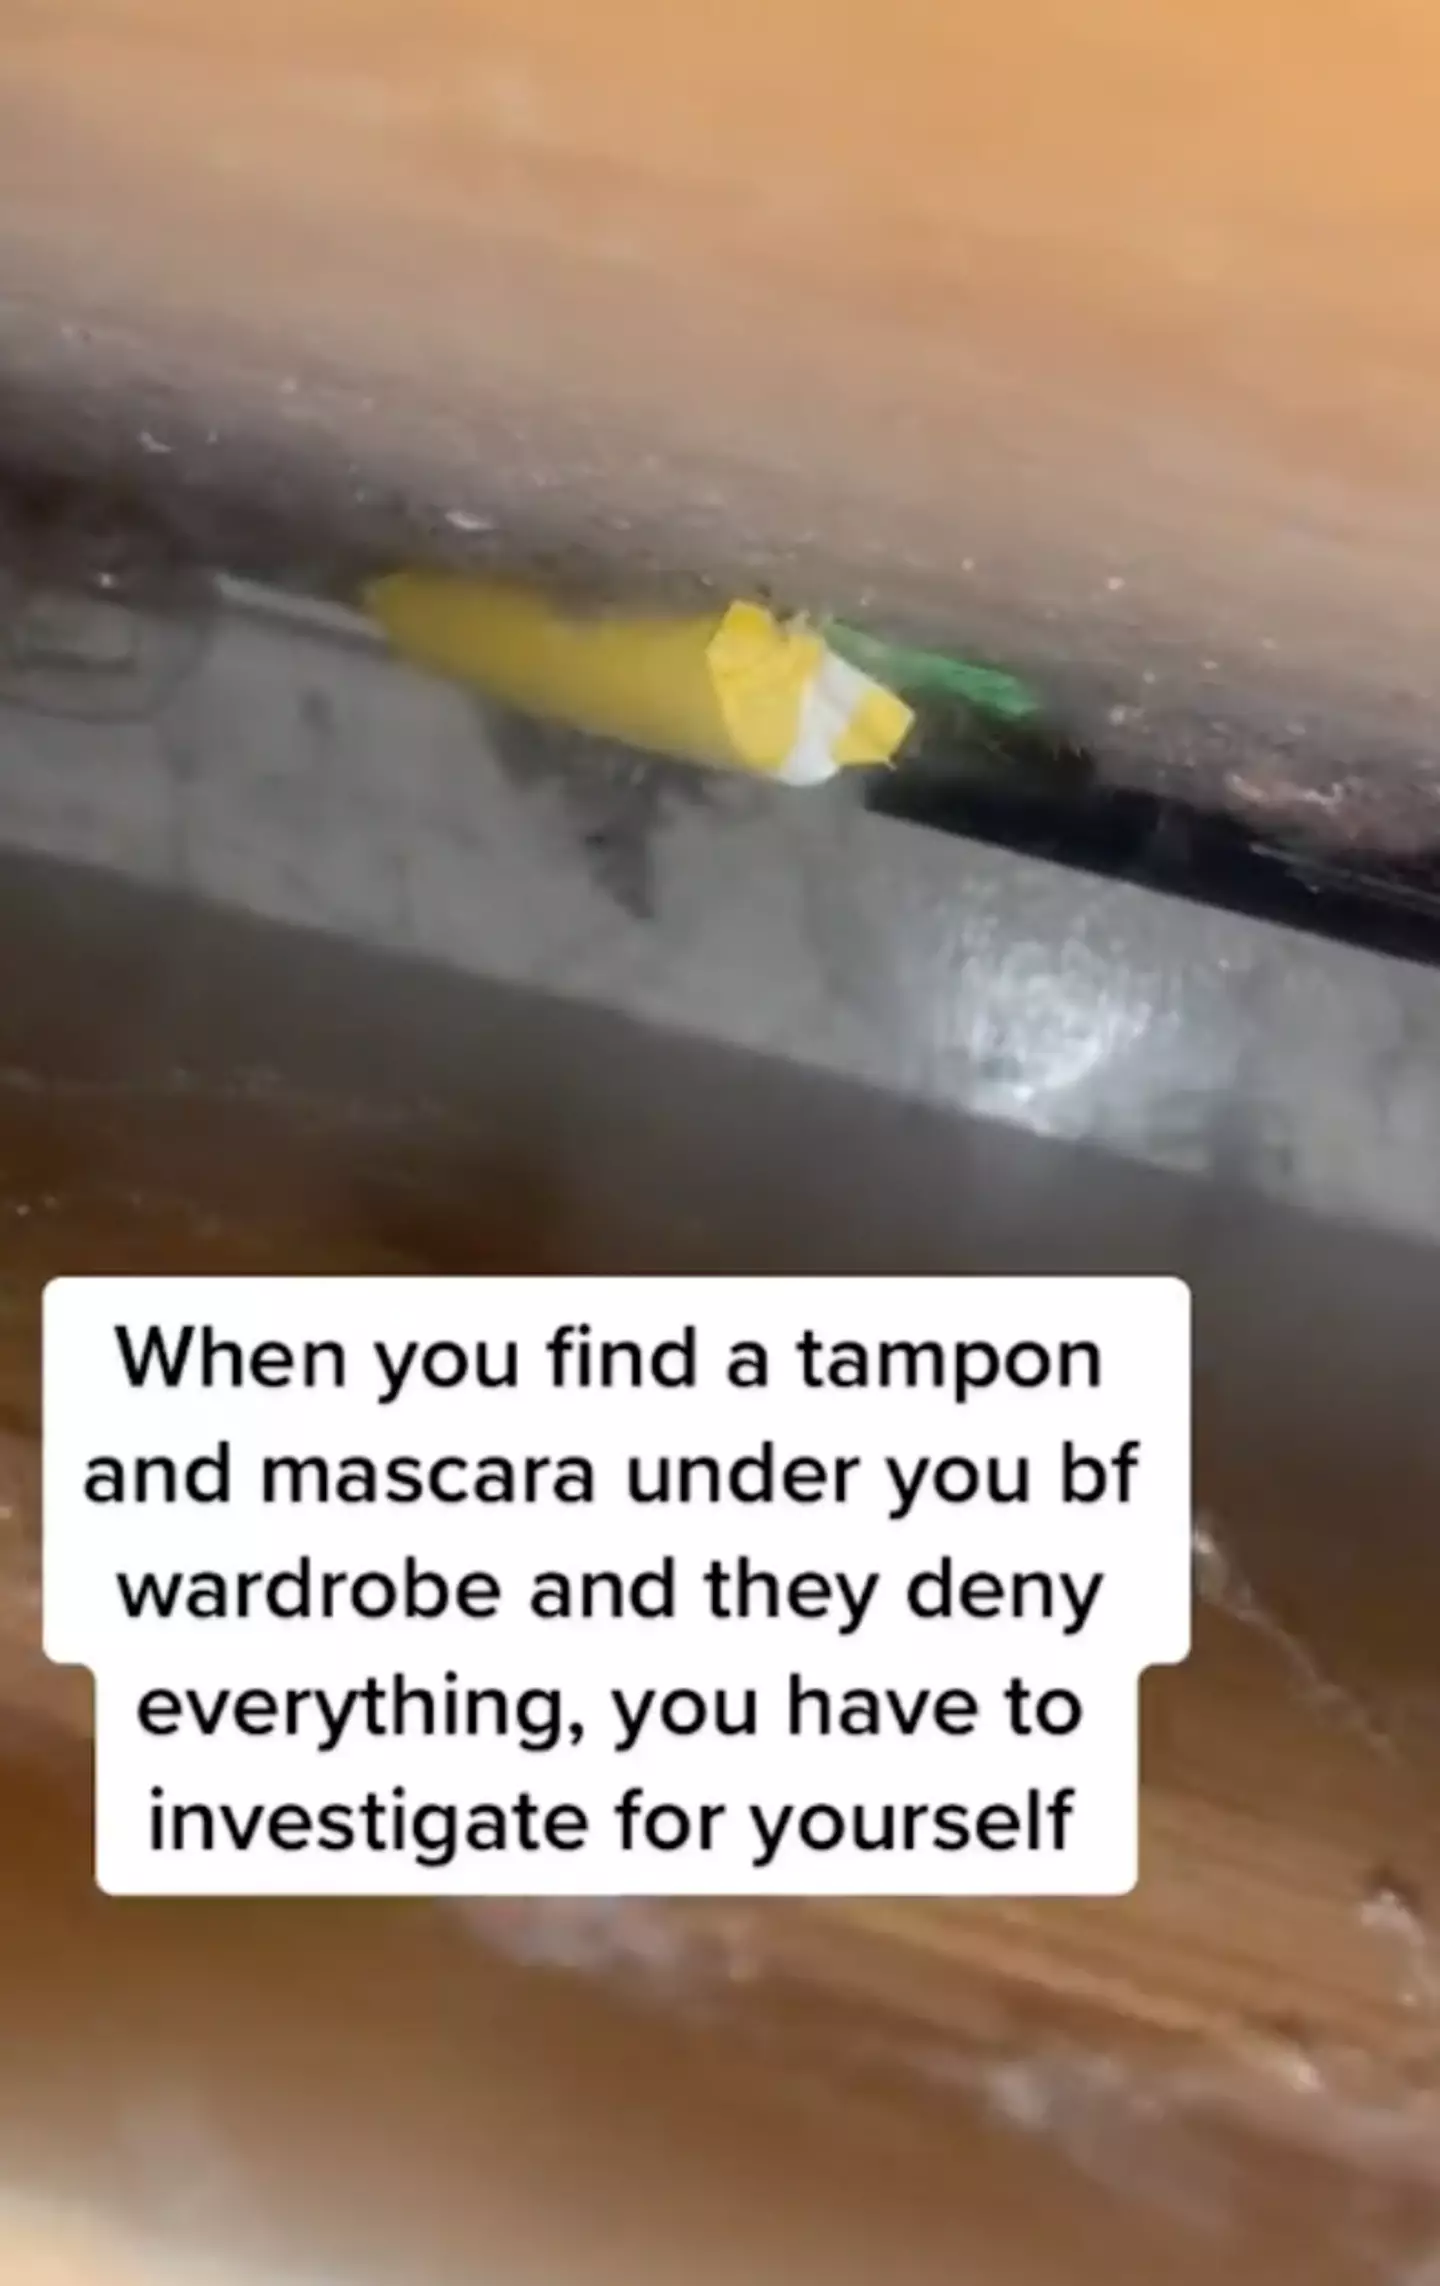 The woman found the tampon (